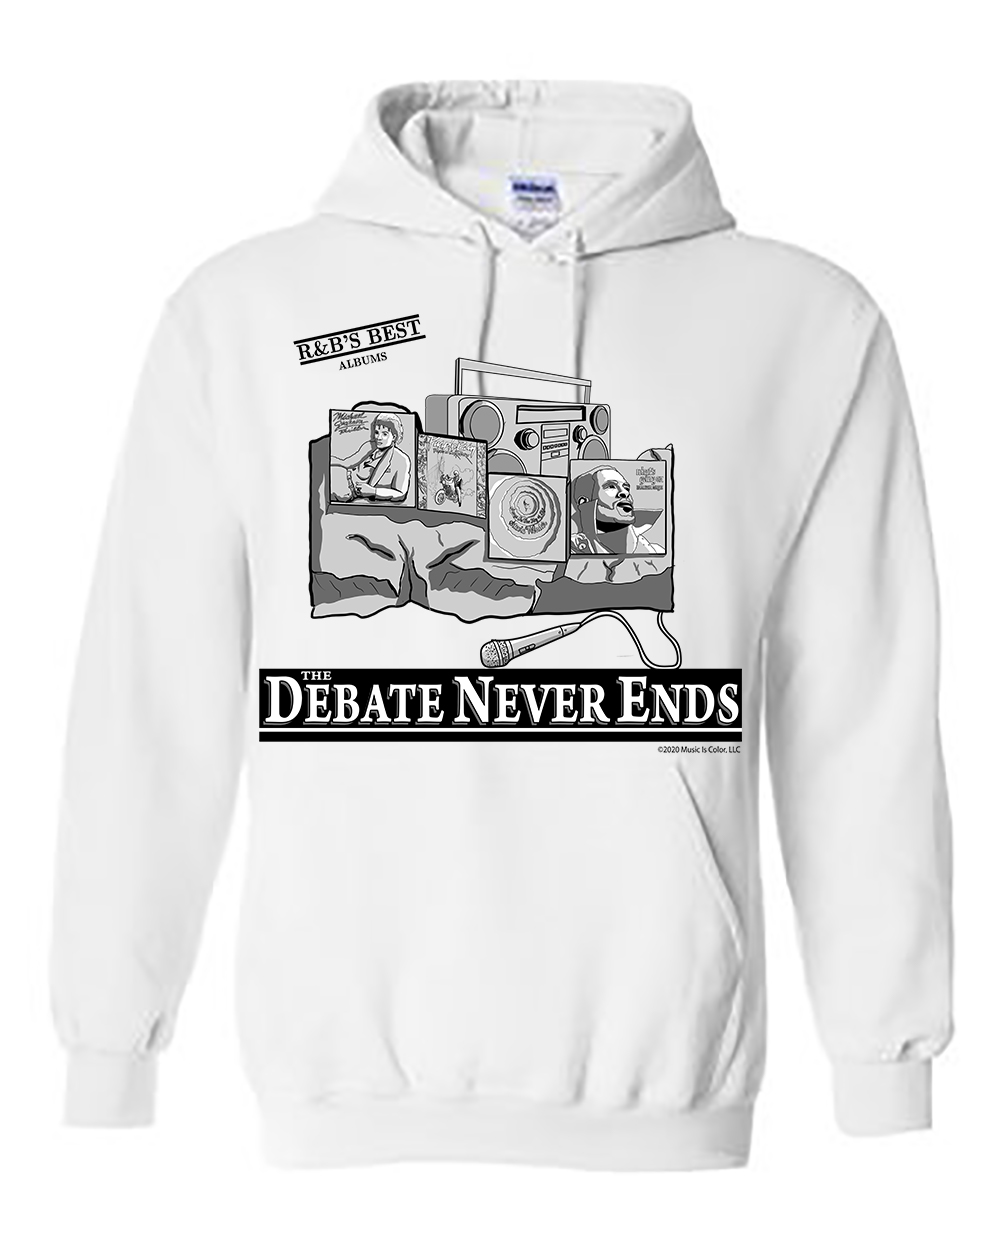 Mount Rushmore - R&B’s Best Albums (White Heavy Duty Hoodie)